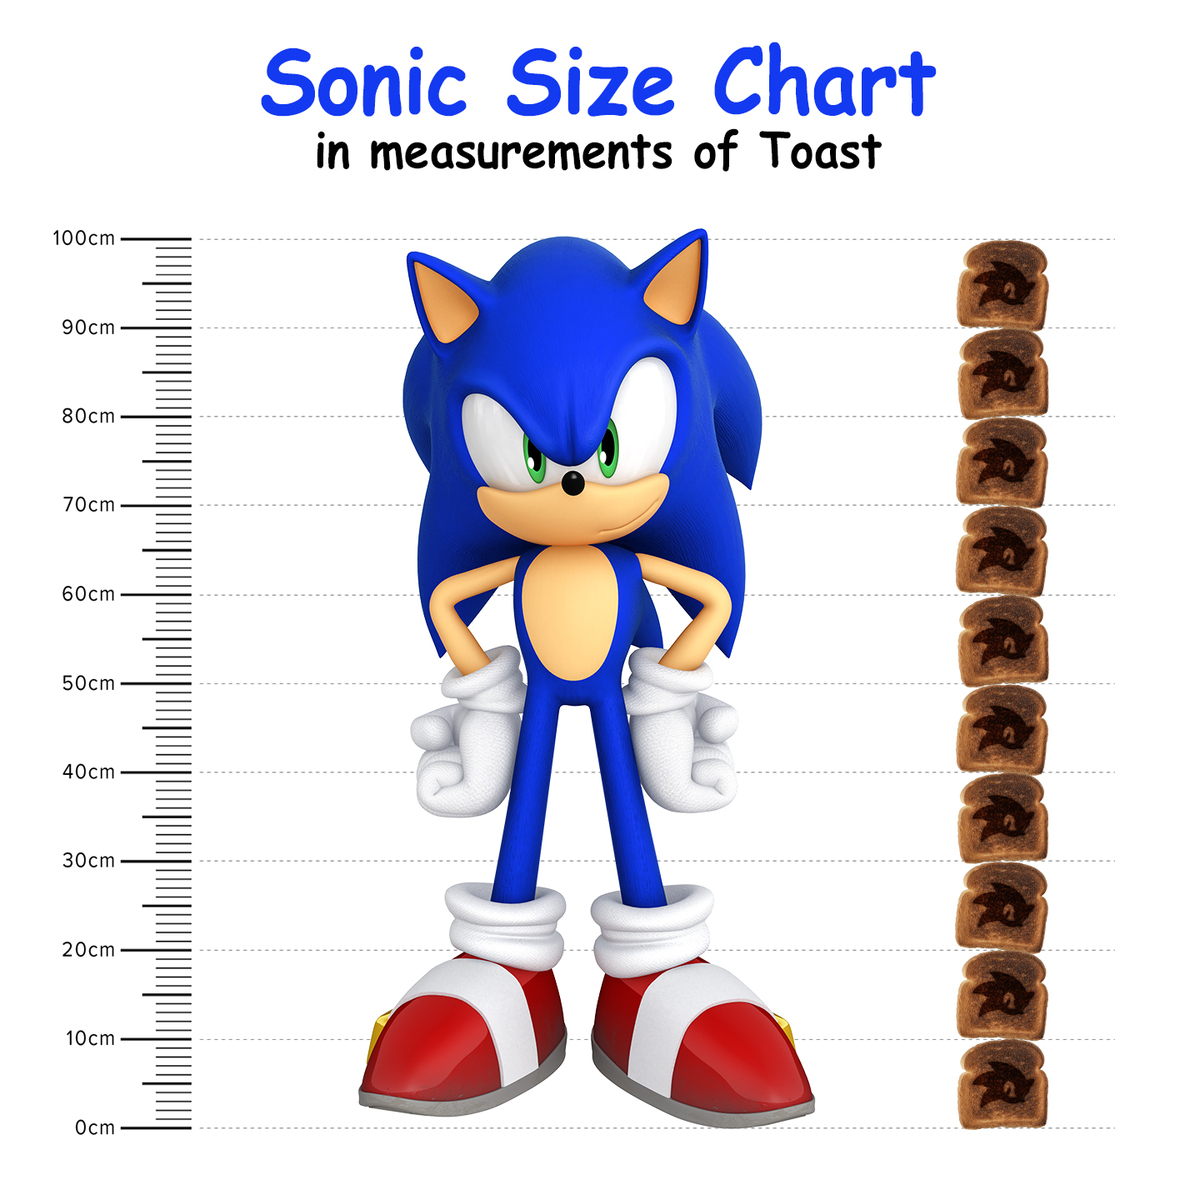 Sonic the Hedgehog on X: Just so you know, Sonic is approximately